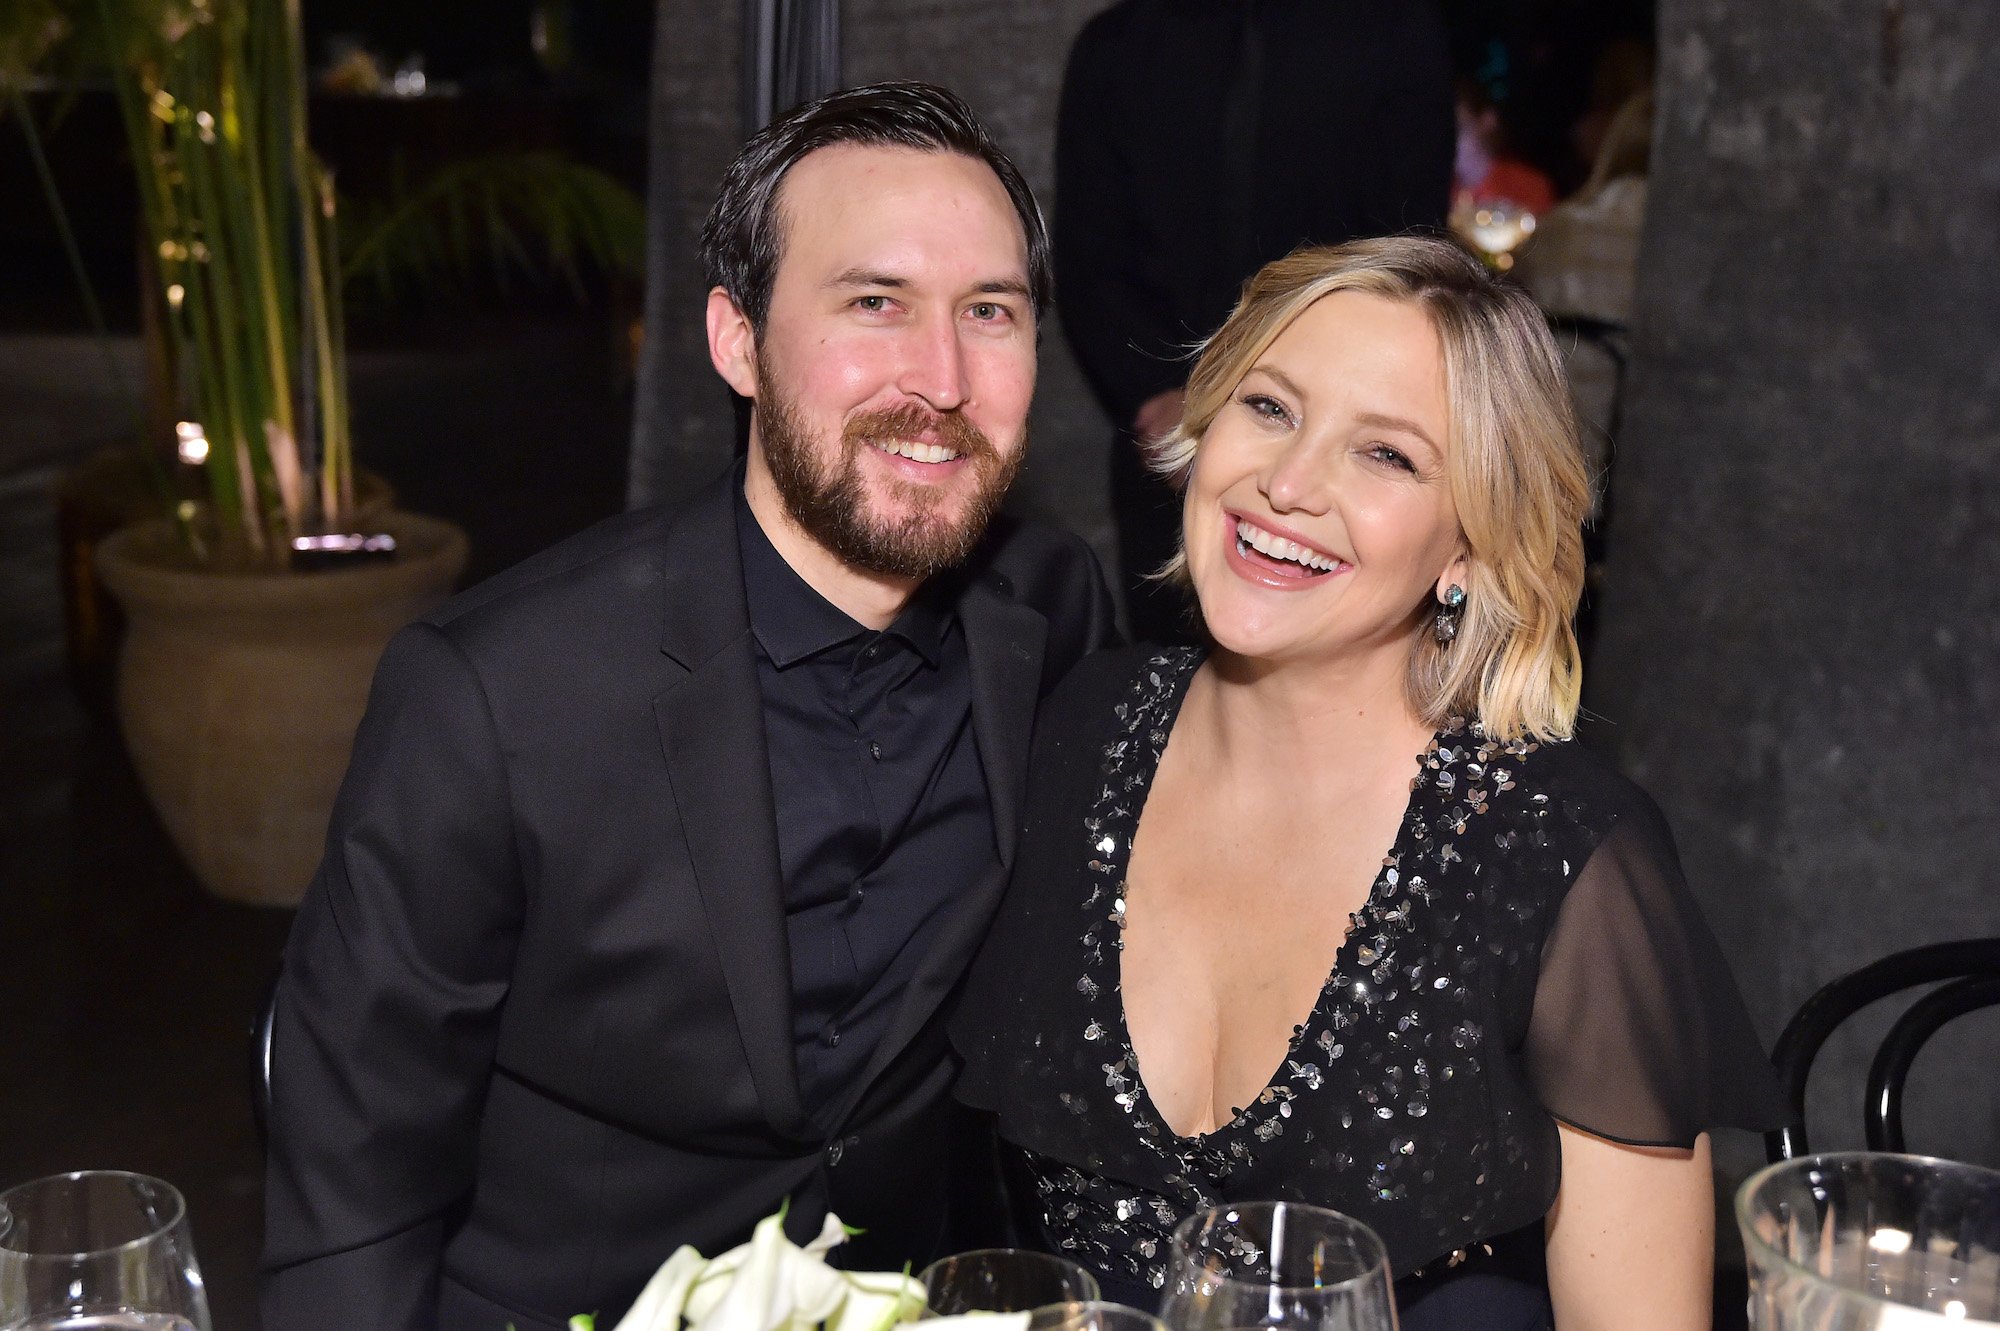 Danny Fujikawa and Kate Hudson posing together at the Michael Kors Dinner To Celebrate Kate Hudson And The World Food Programme in 2018